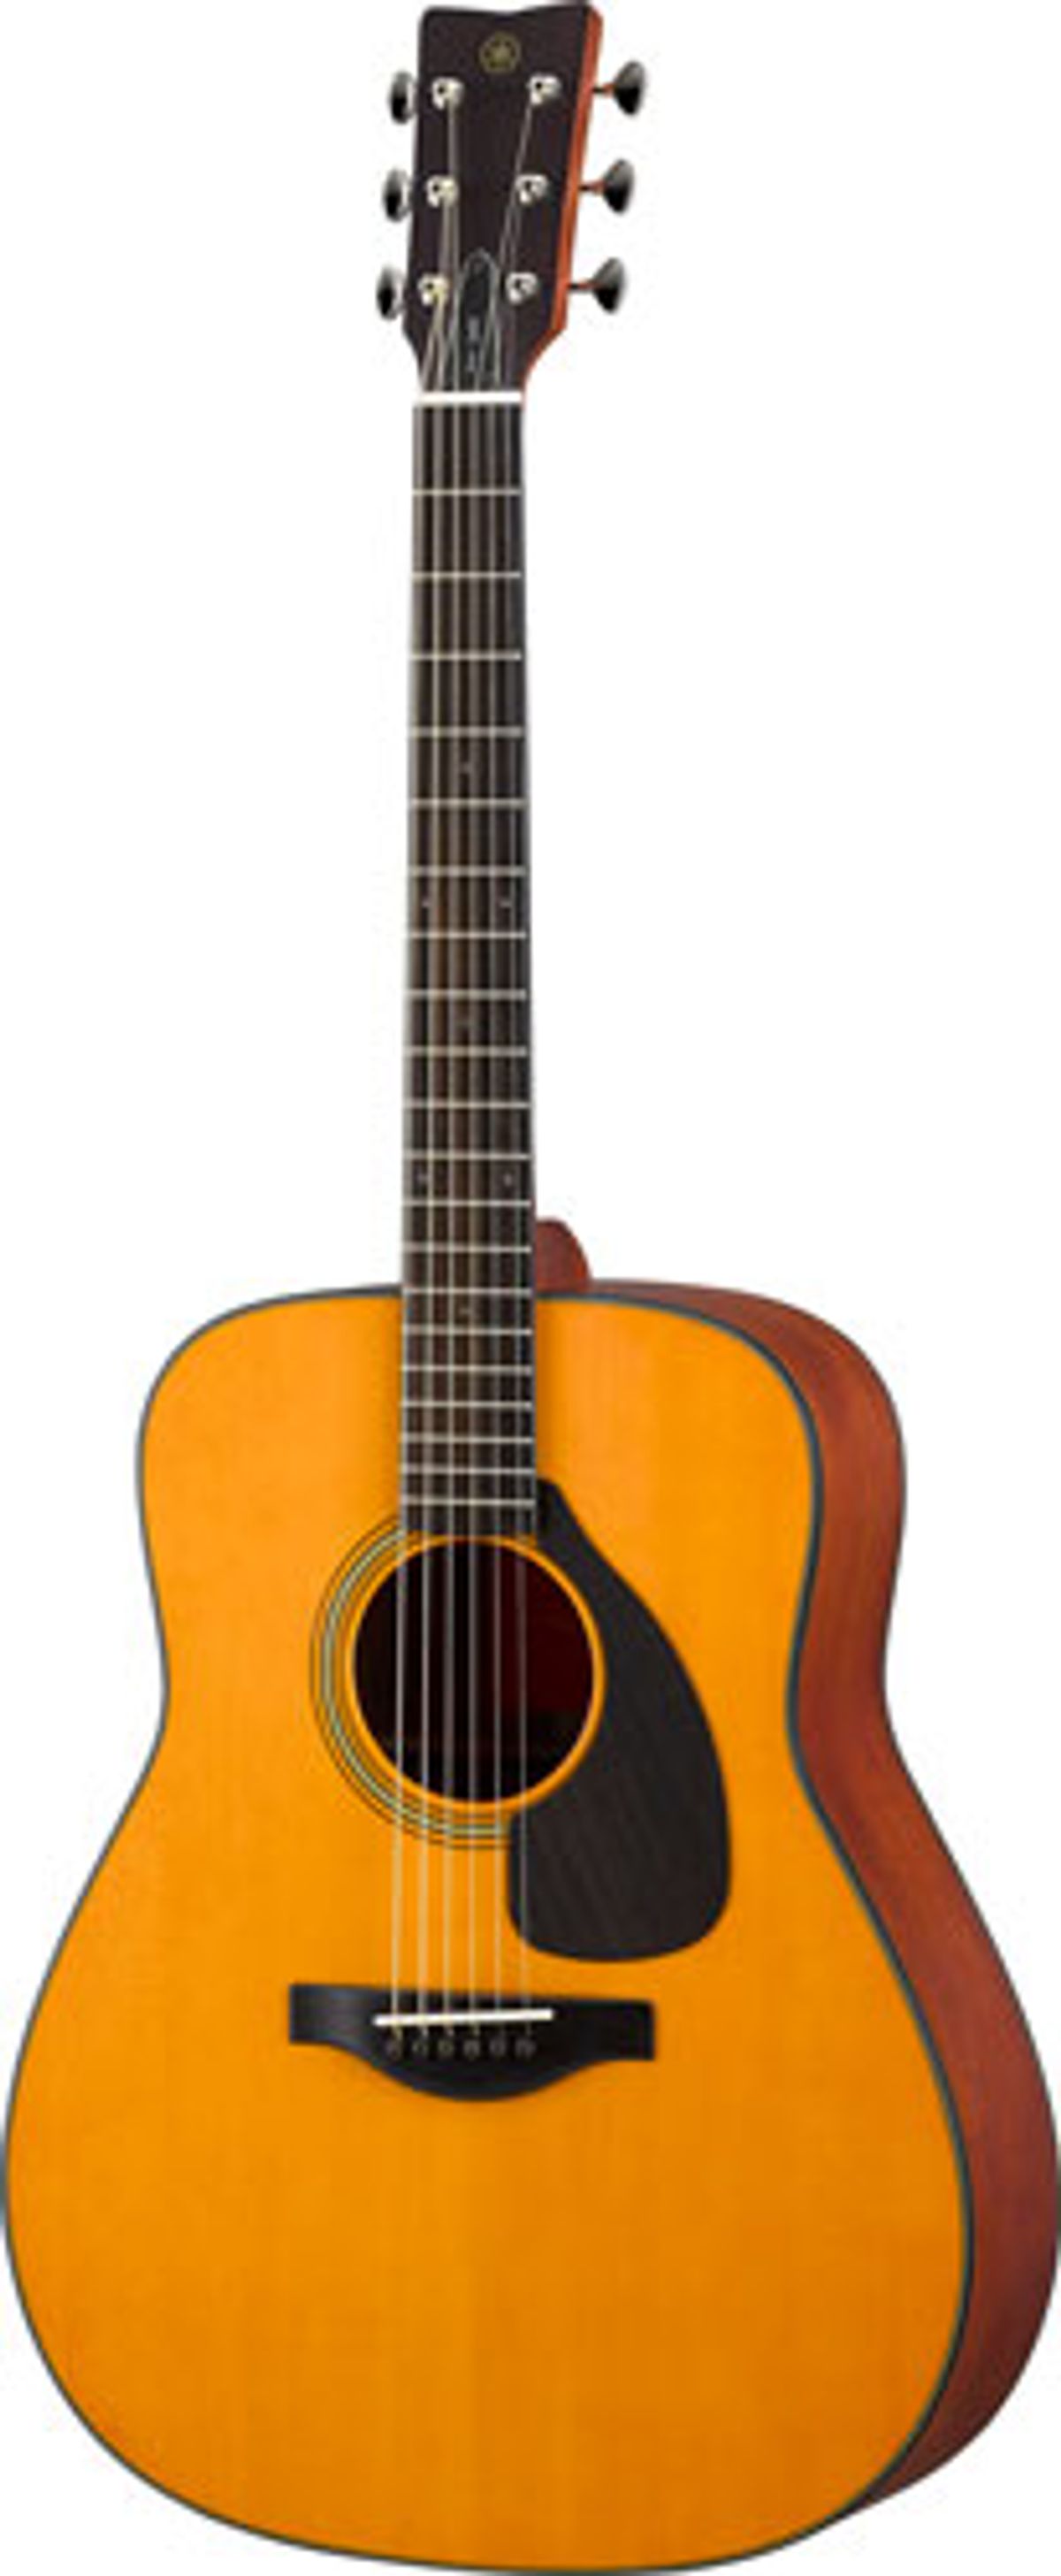 Yamaha Launches FG Red Label Acoustic Guitars